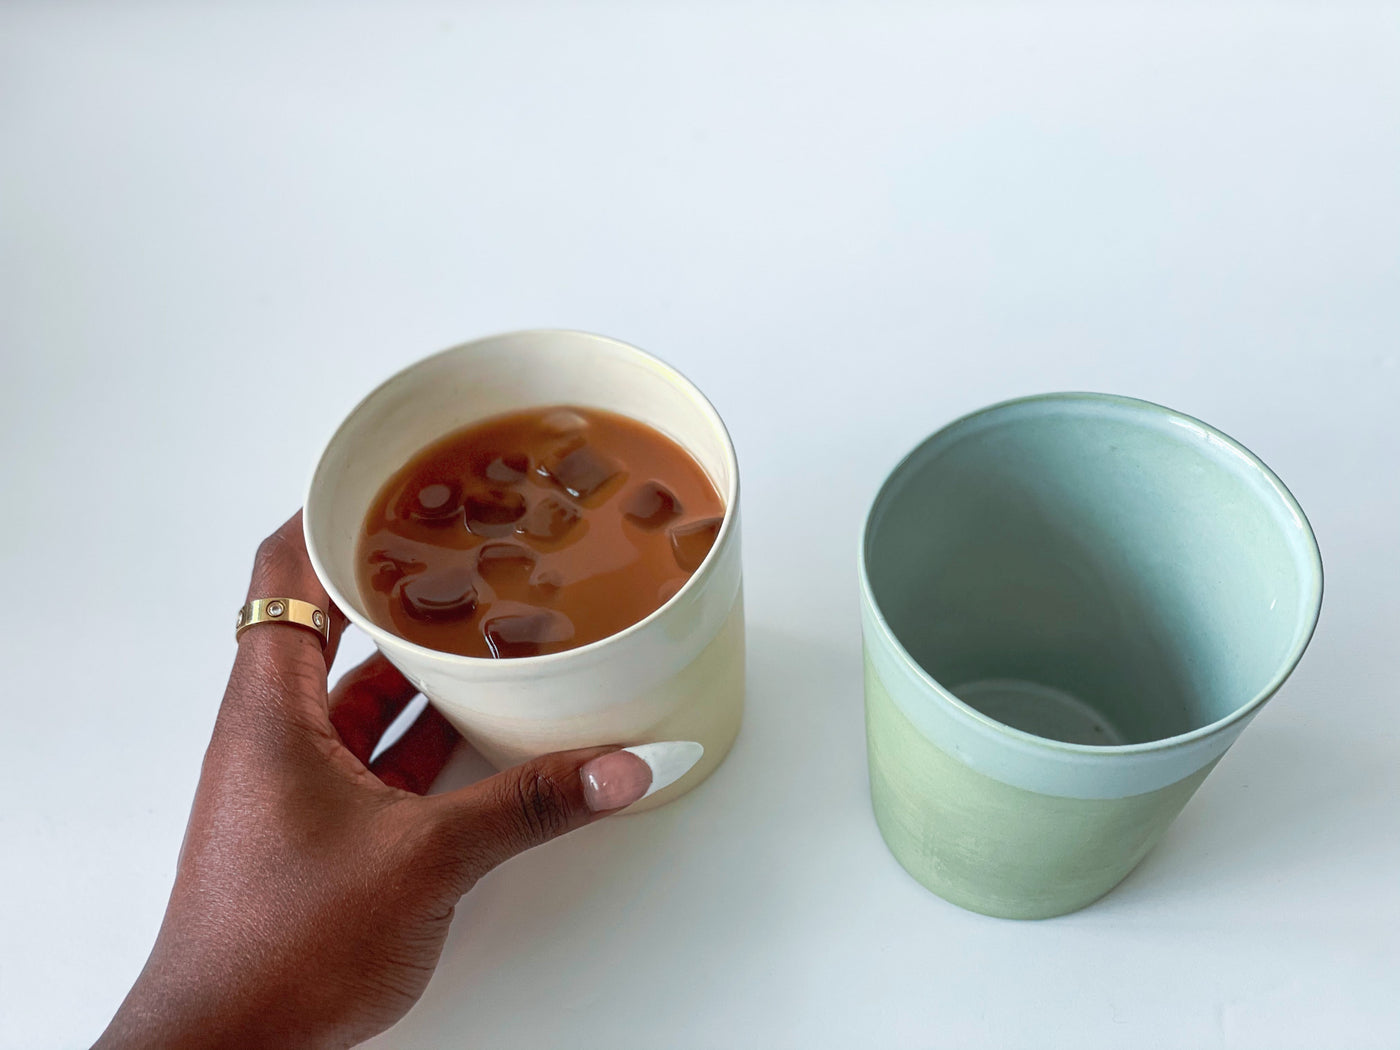 2 sleek and simple local cups. One colored sage and the other sand. Cups have a slanted profile and smooth finish 